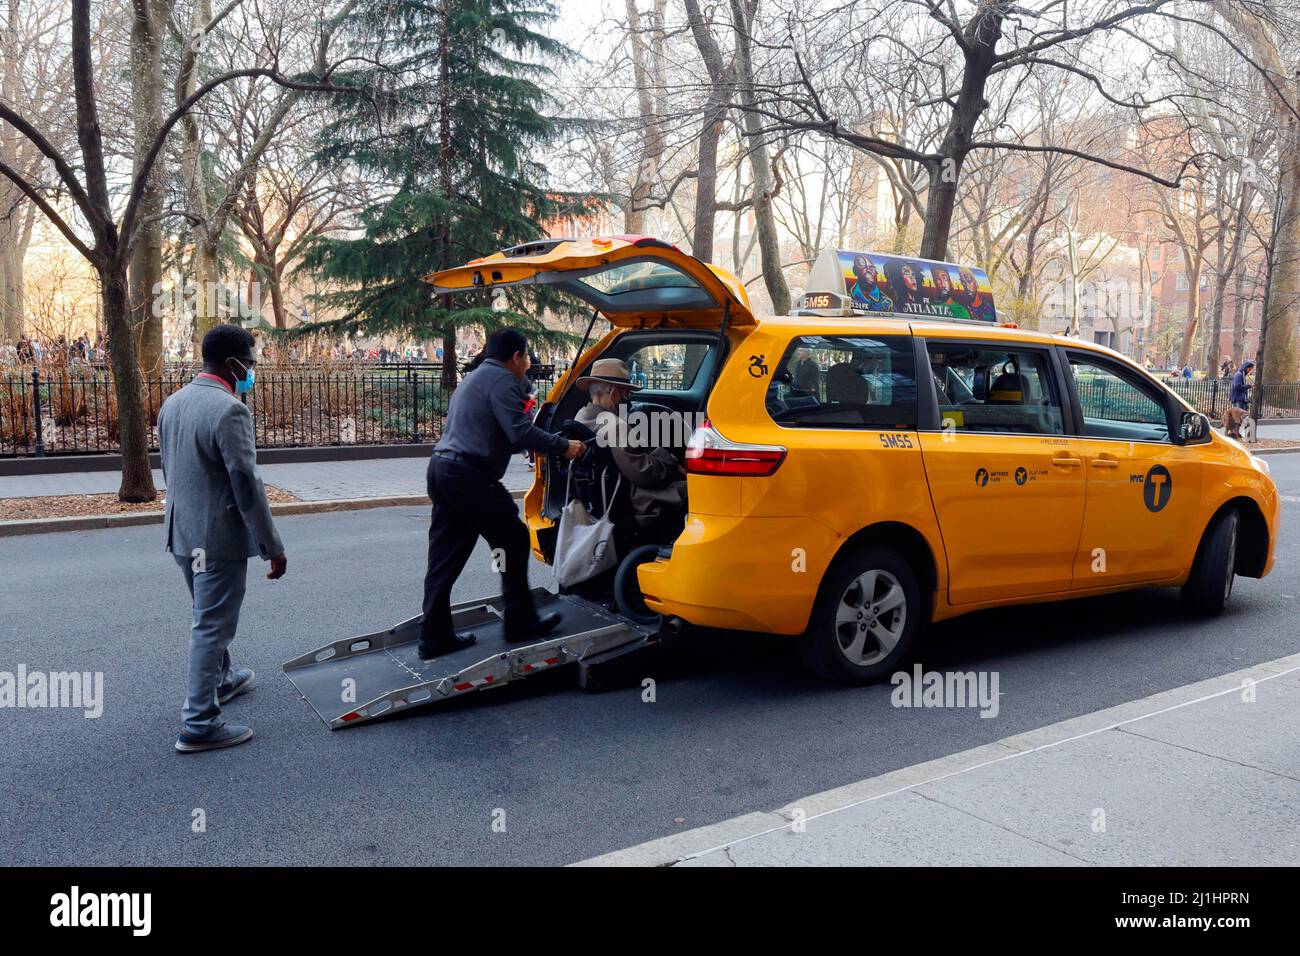 A NYC taxi driver assists a wheelchair user into a NYC yellow taxi cab with a wheelchair accessible ramp in the back. Stock Photo